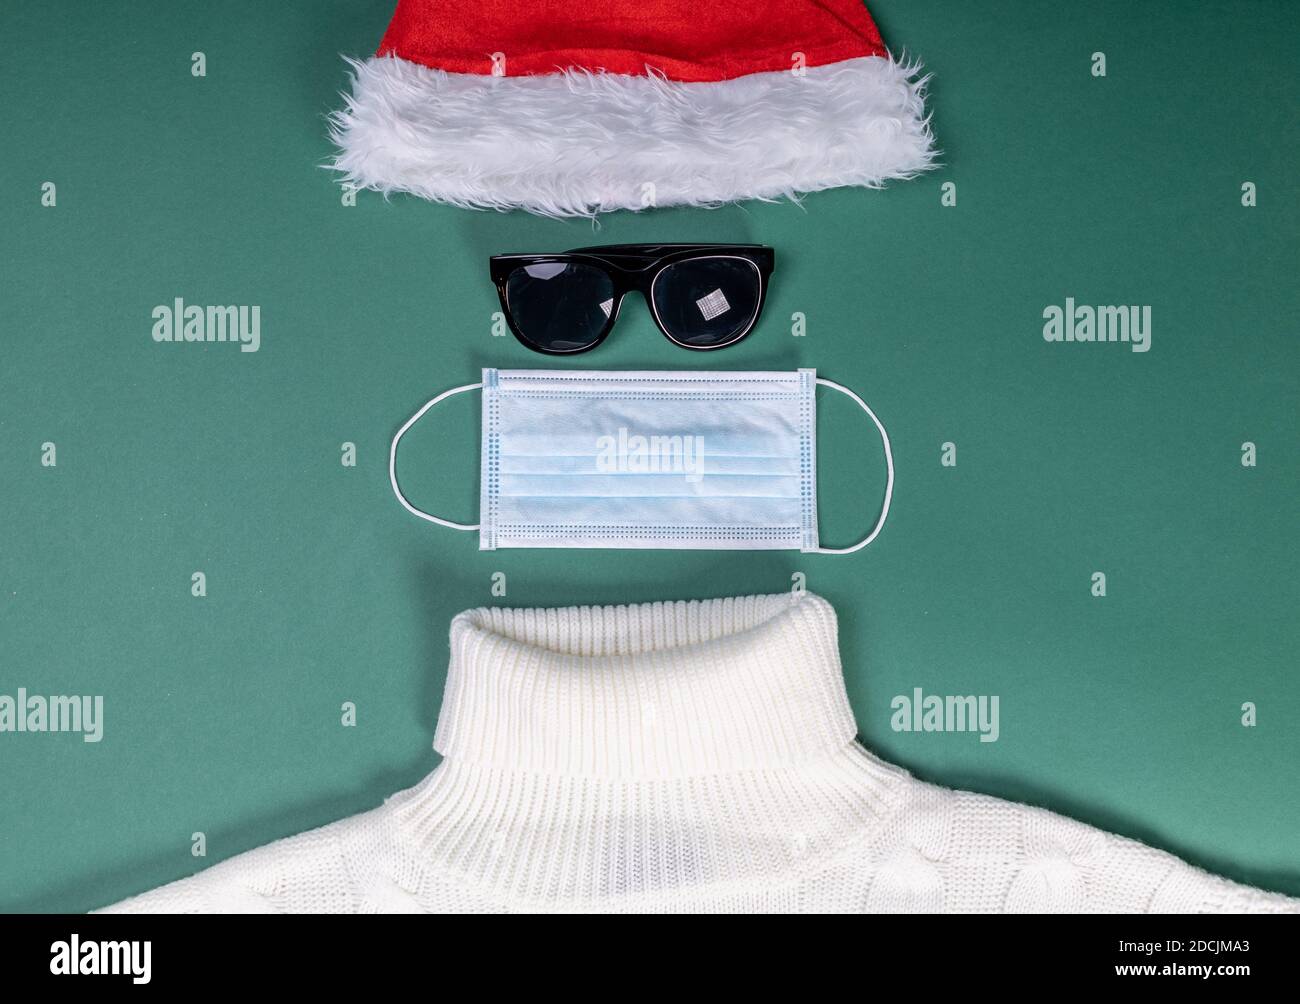 red hat mask and white sweater flat lay shape of Santa Slaus Stock Photo